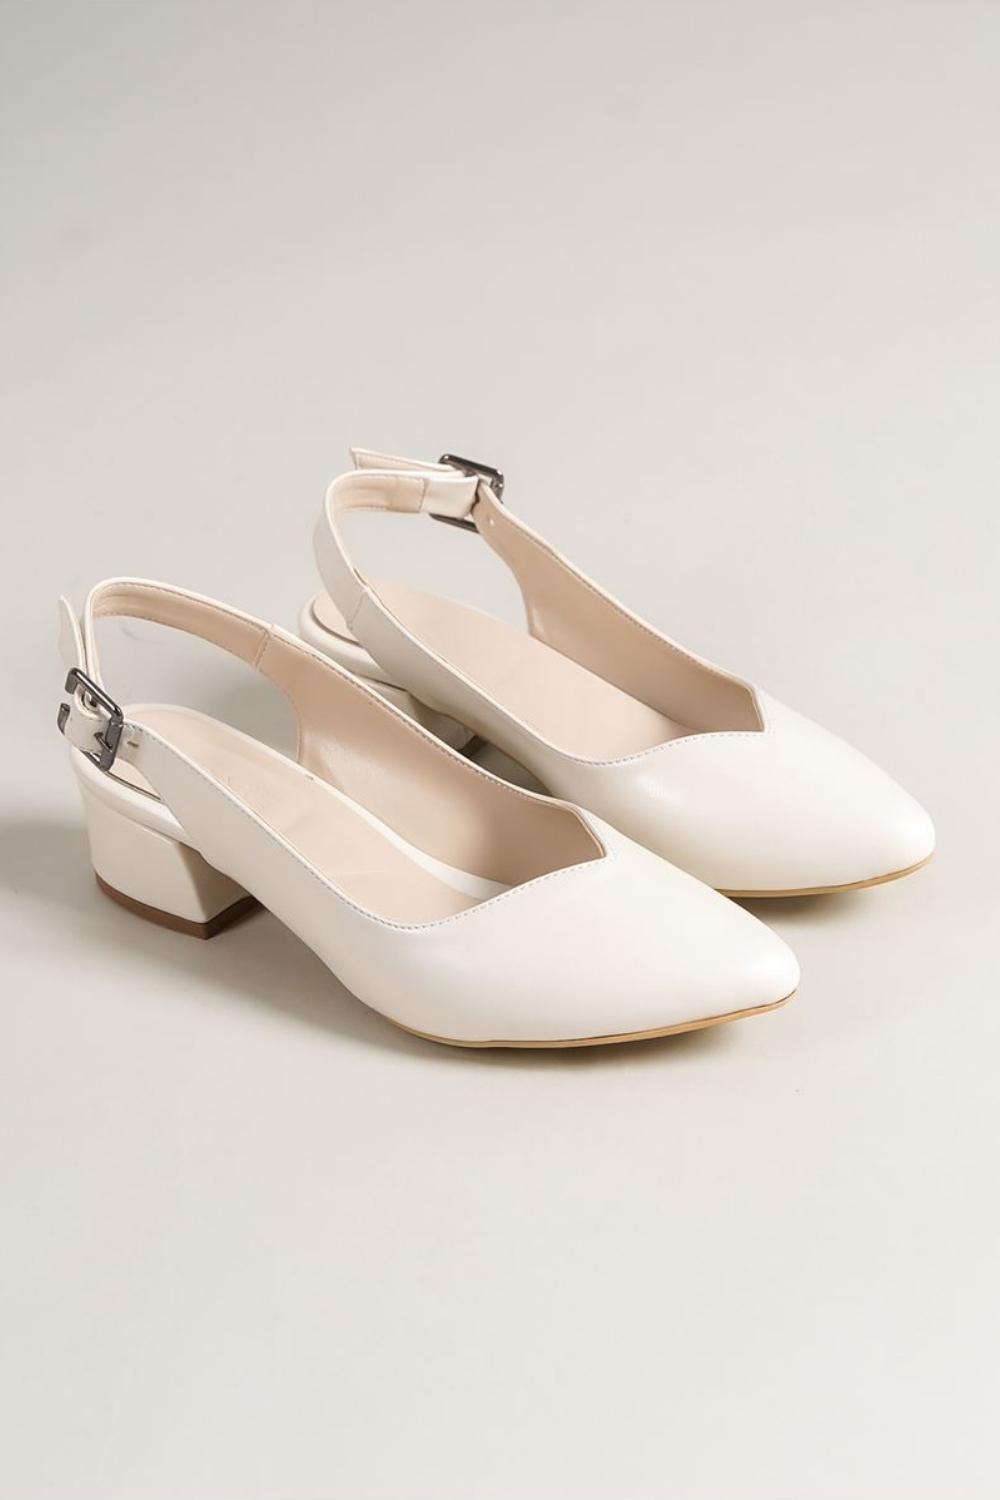 Valentina White Pearl Heels Women's Shoes - STREETMODE™